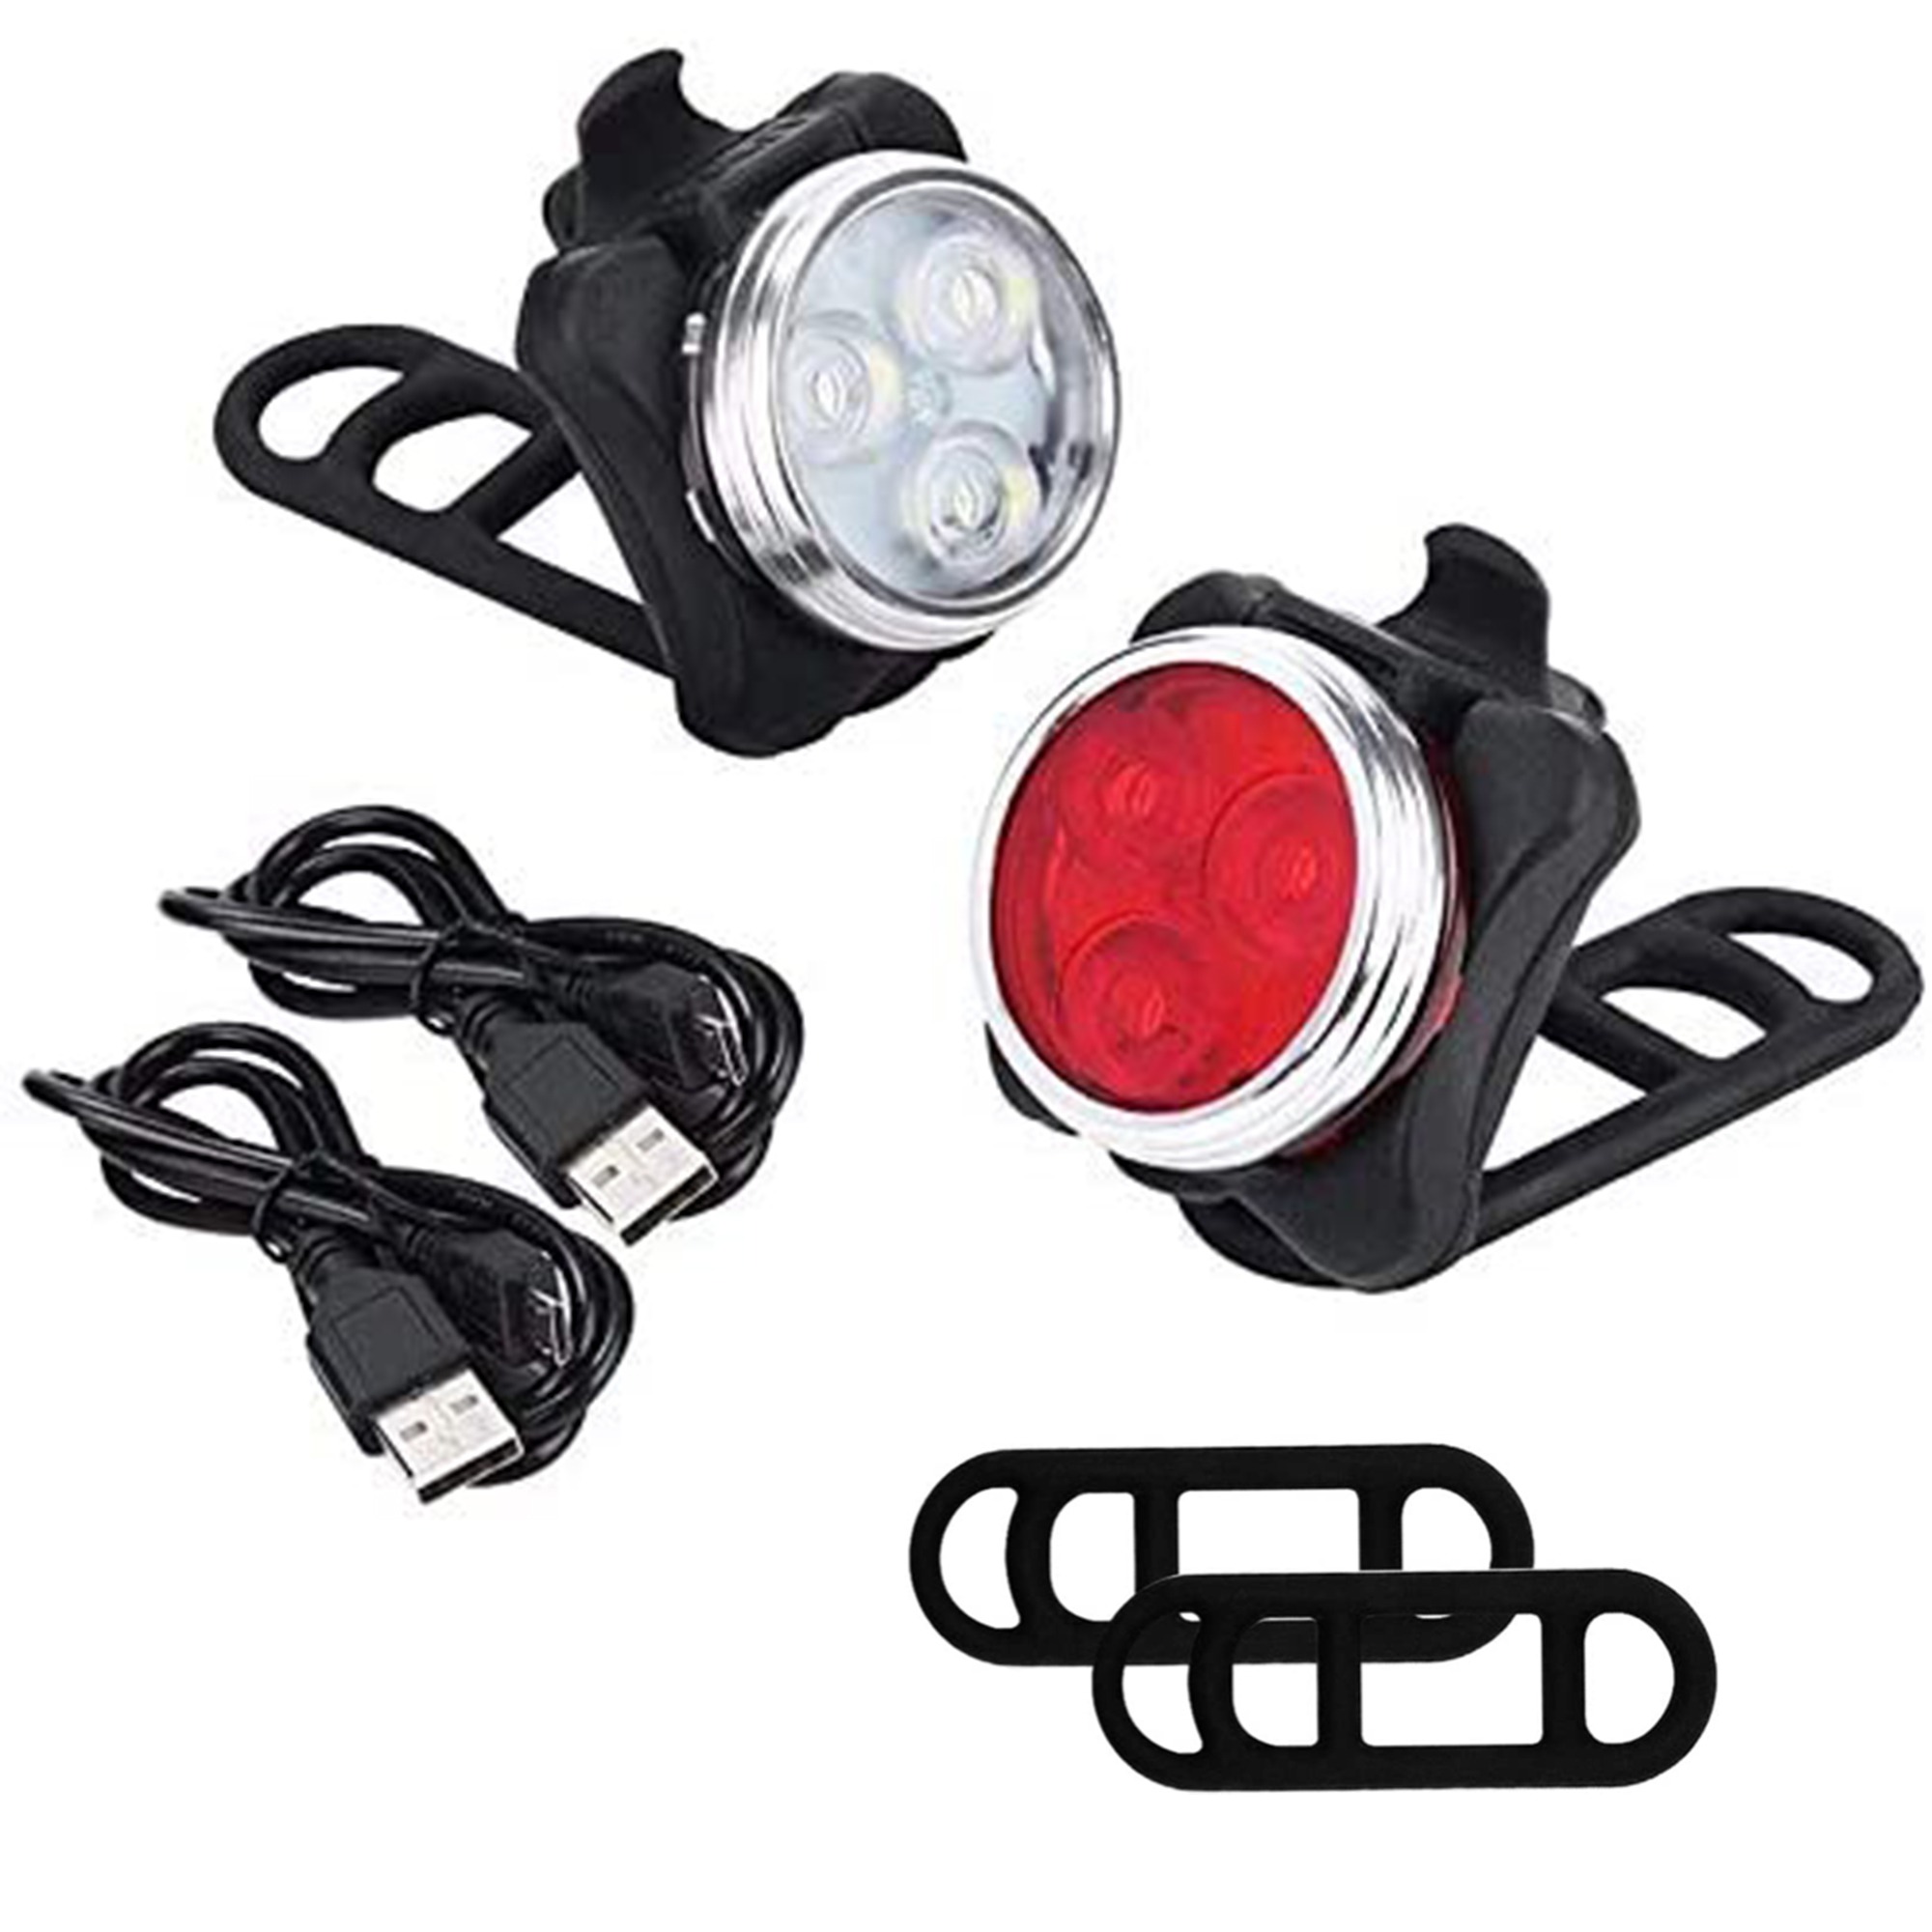 Bike Front Light LED Vintage 1LED Bicycle Headlight Taillight Super Bright High Lumens Electroplate Surface Treatment with Mounting Bracket Powered by AAA Battery Not Included Bike Accessory 